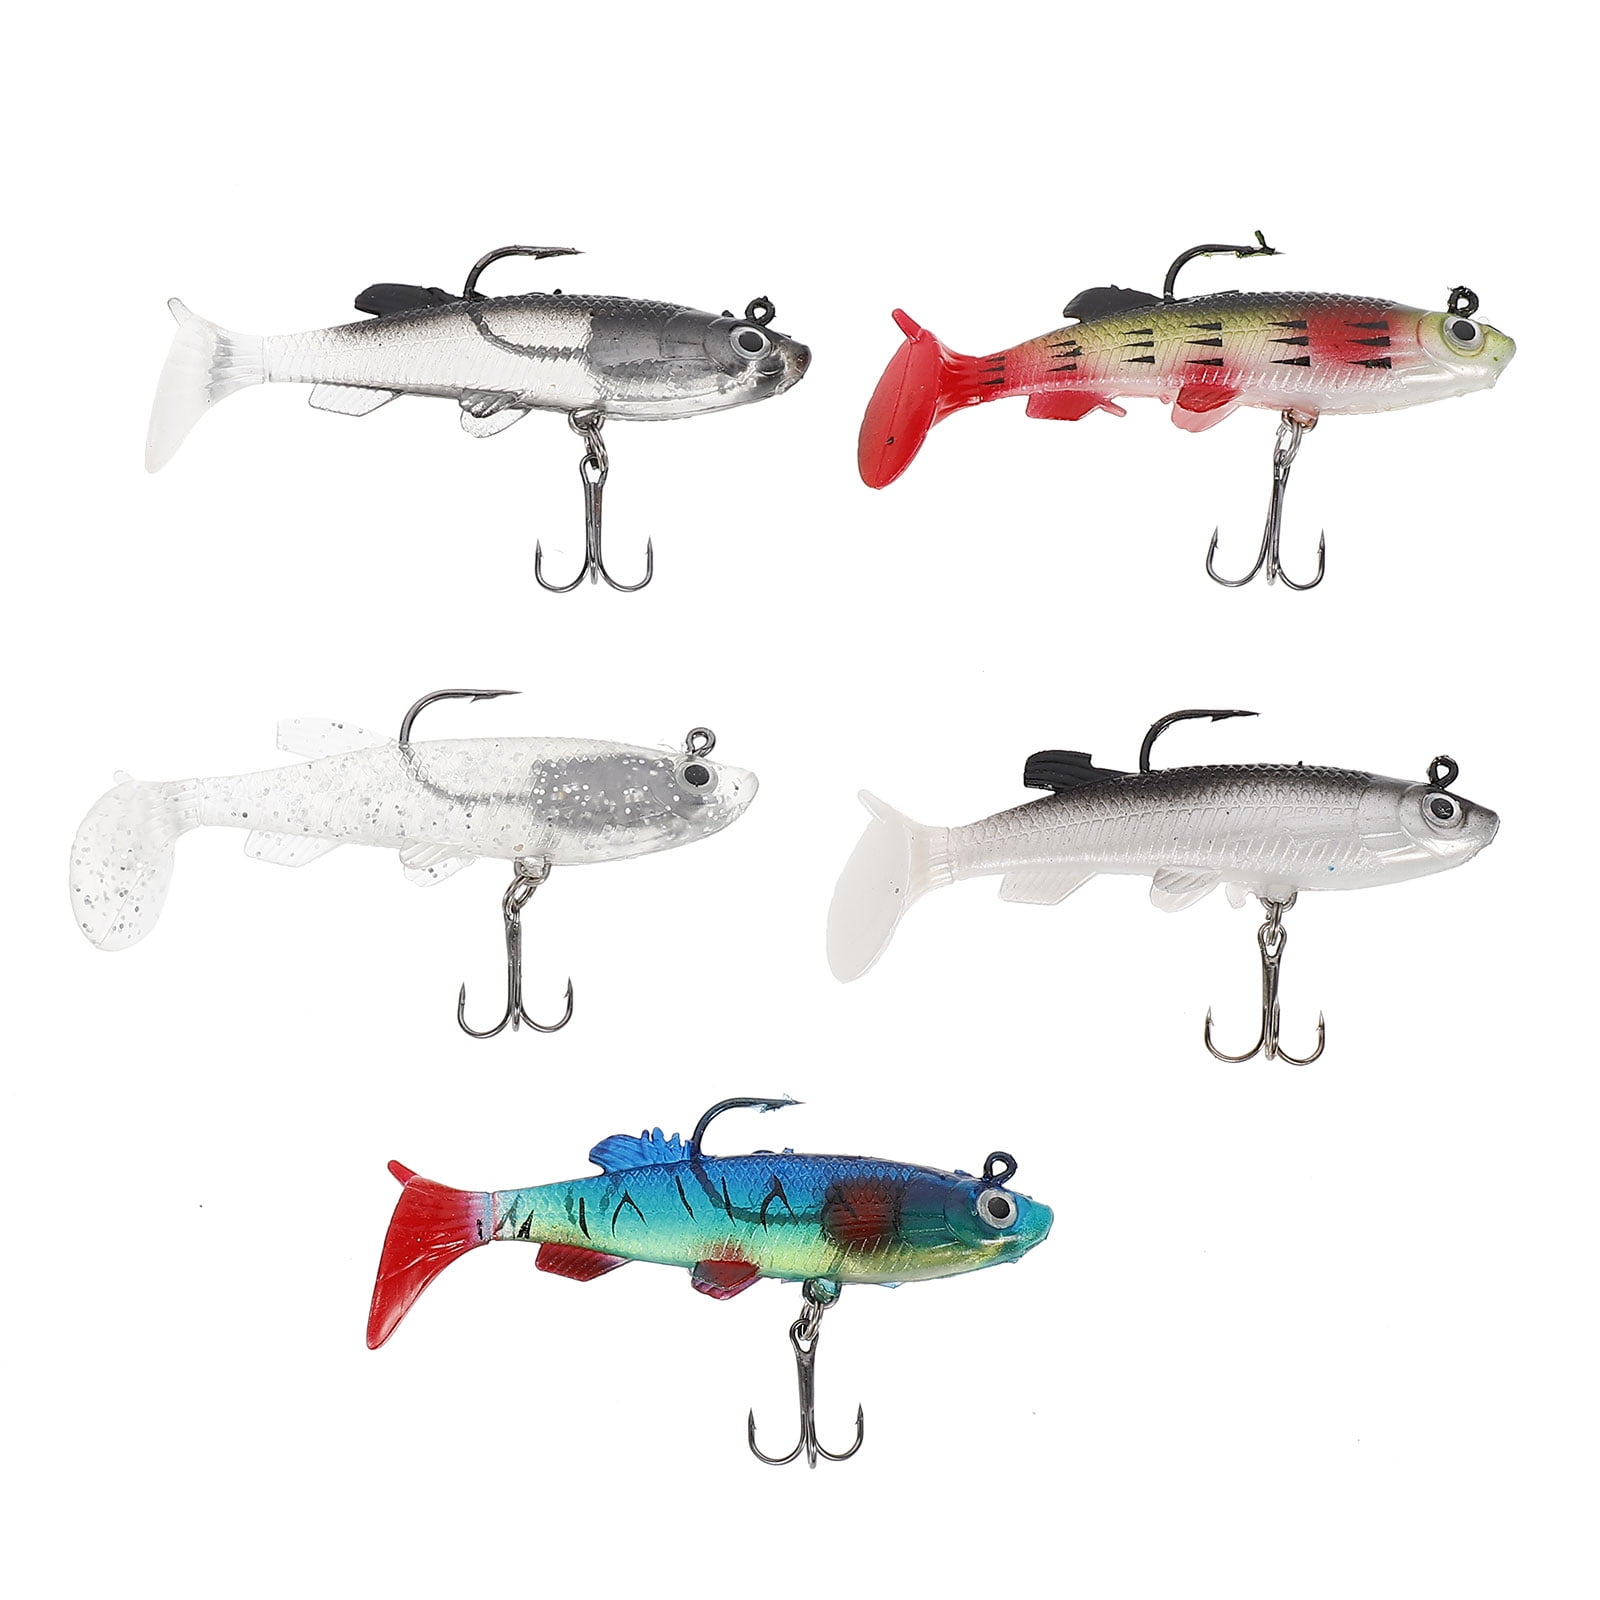 THKFISH Soft Swimbait Soft Plastic Fishing Lures Bass Lures Swim Baits Lures  for Bass Fishing Worms Fishing Bait for Bass Trout Walleye Color 5-S#  3.15in*6pcs , soft plastic worms for bass fishing